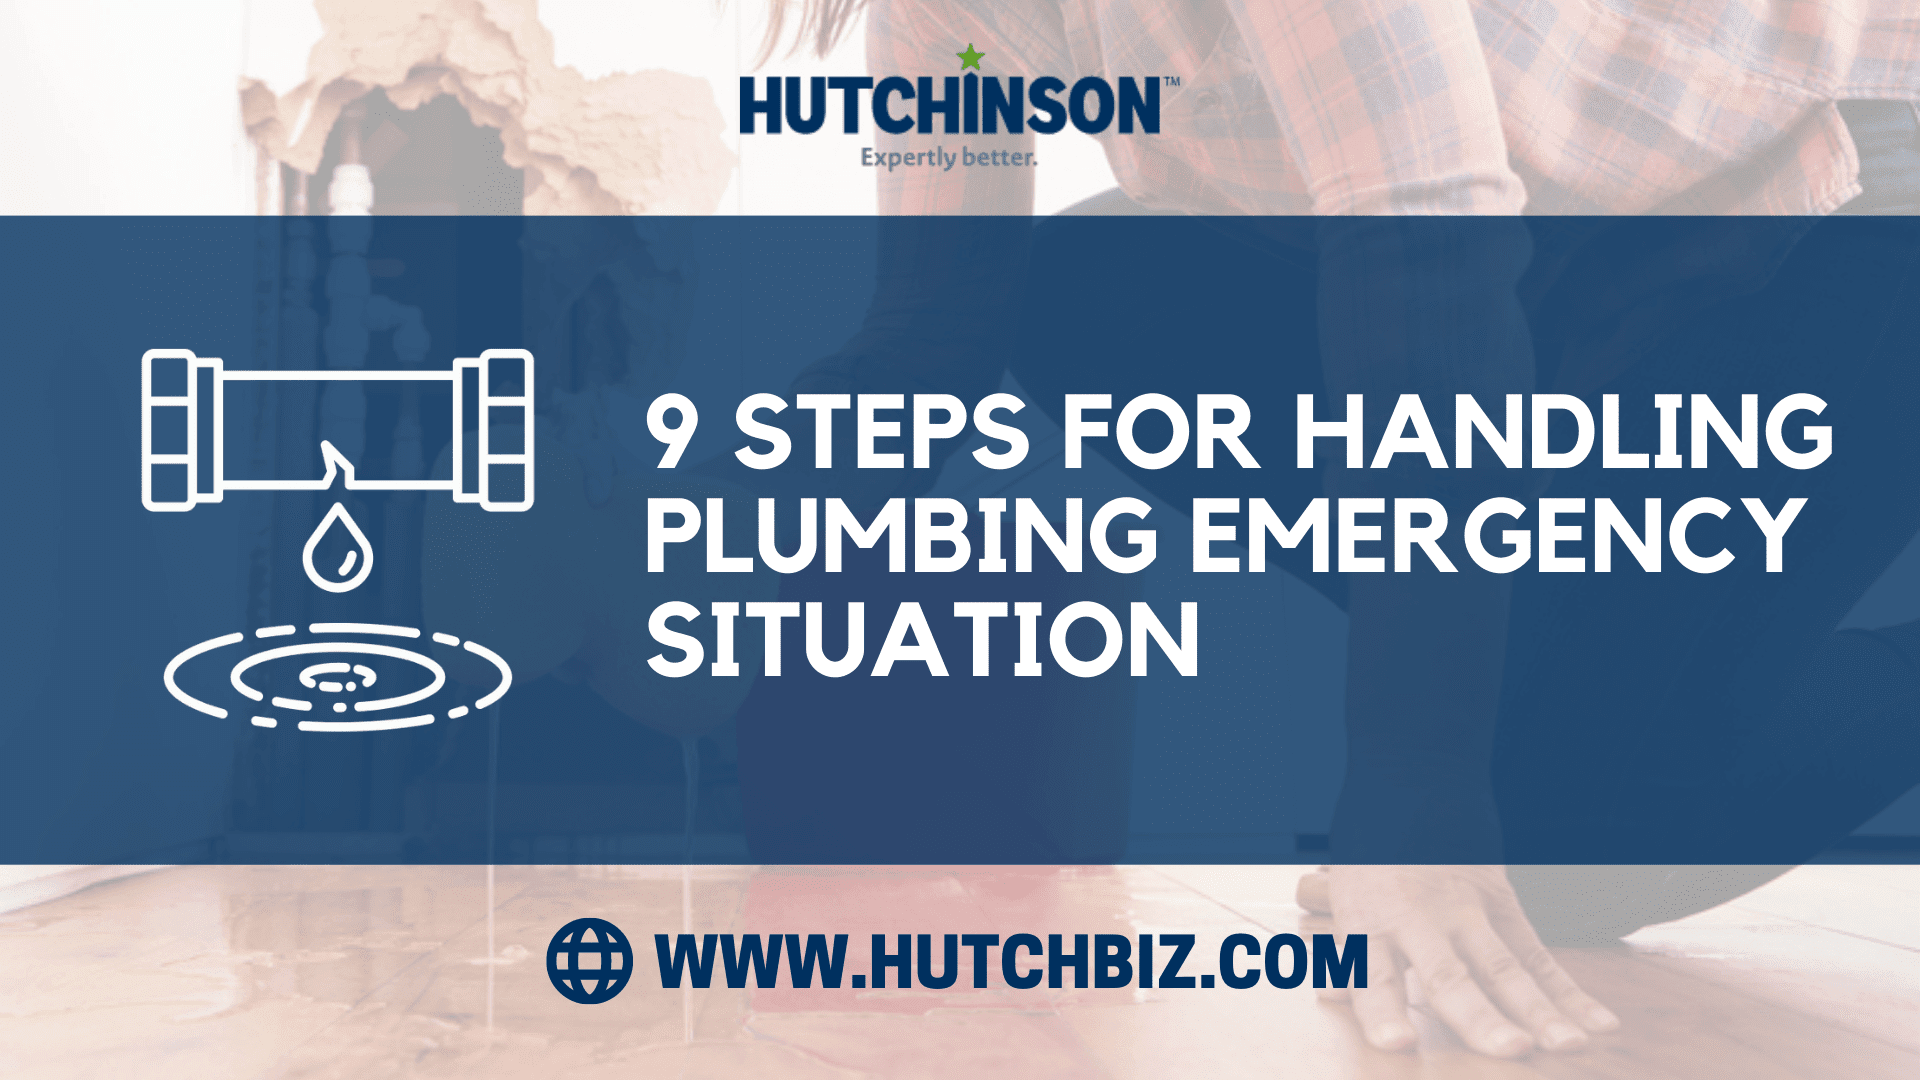 9 Steps for Handling Plumbing Emergency Situation